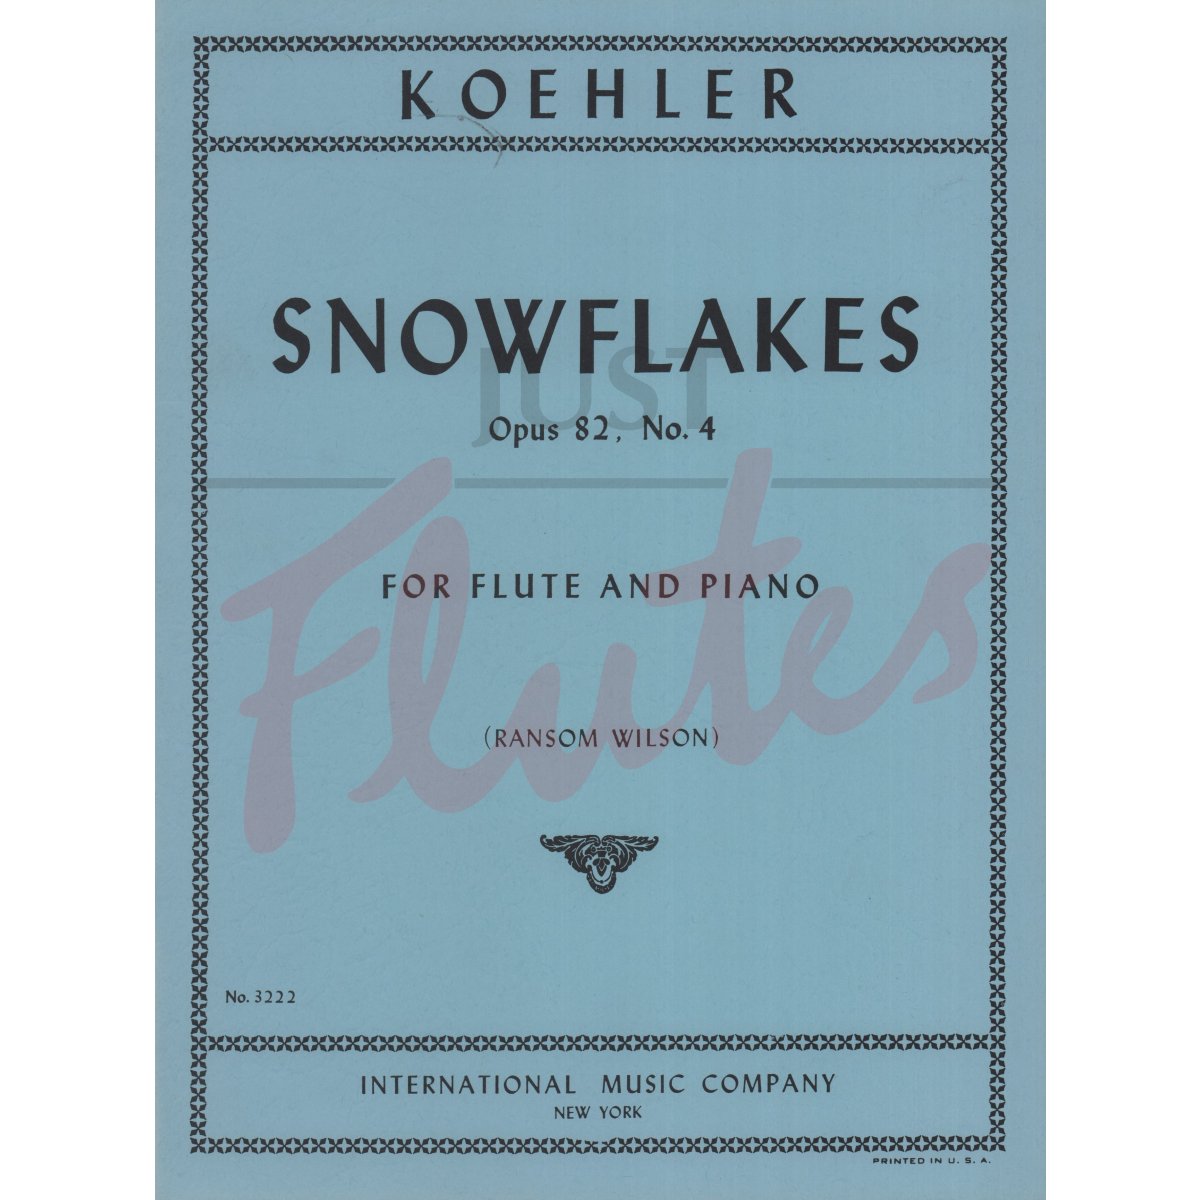 Snowflakes for Flute and Piano